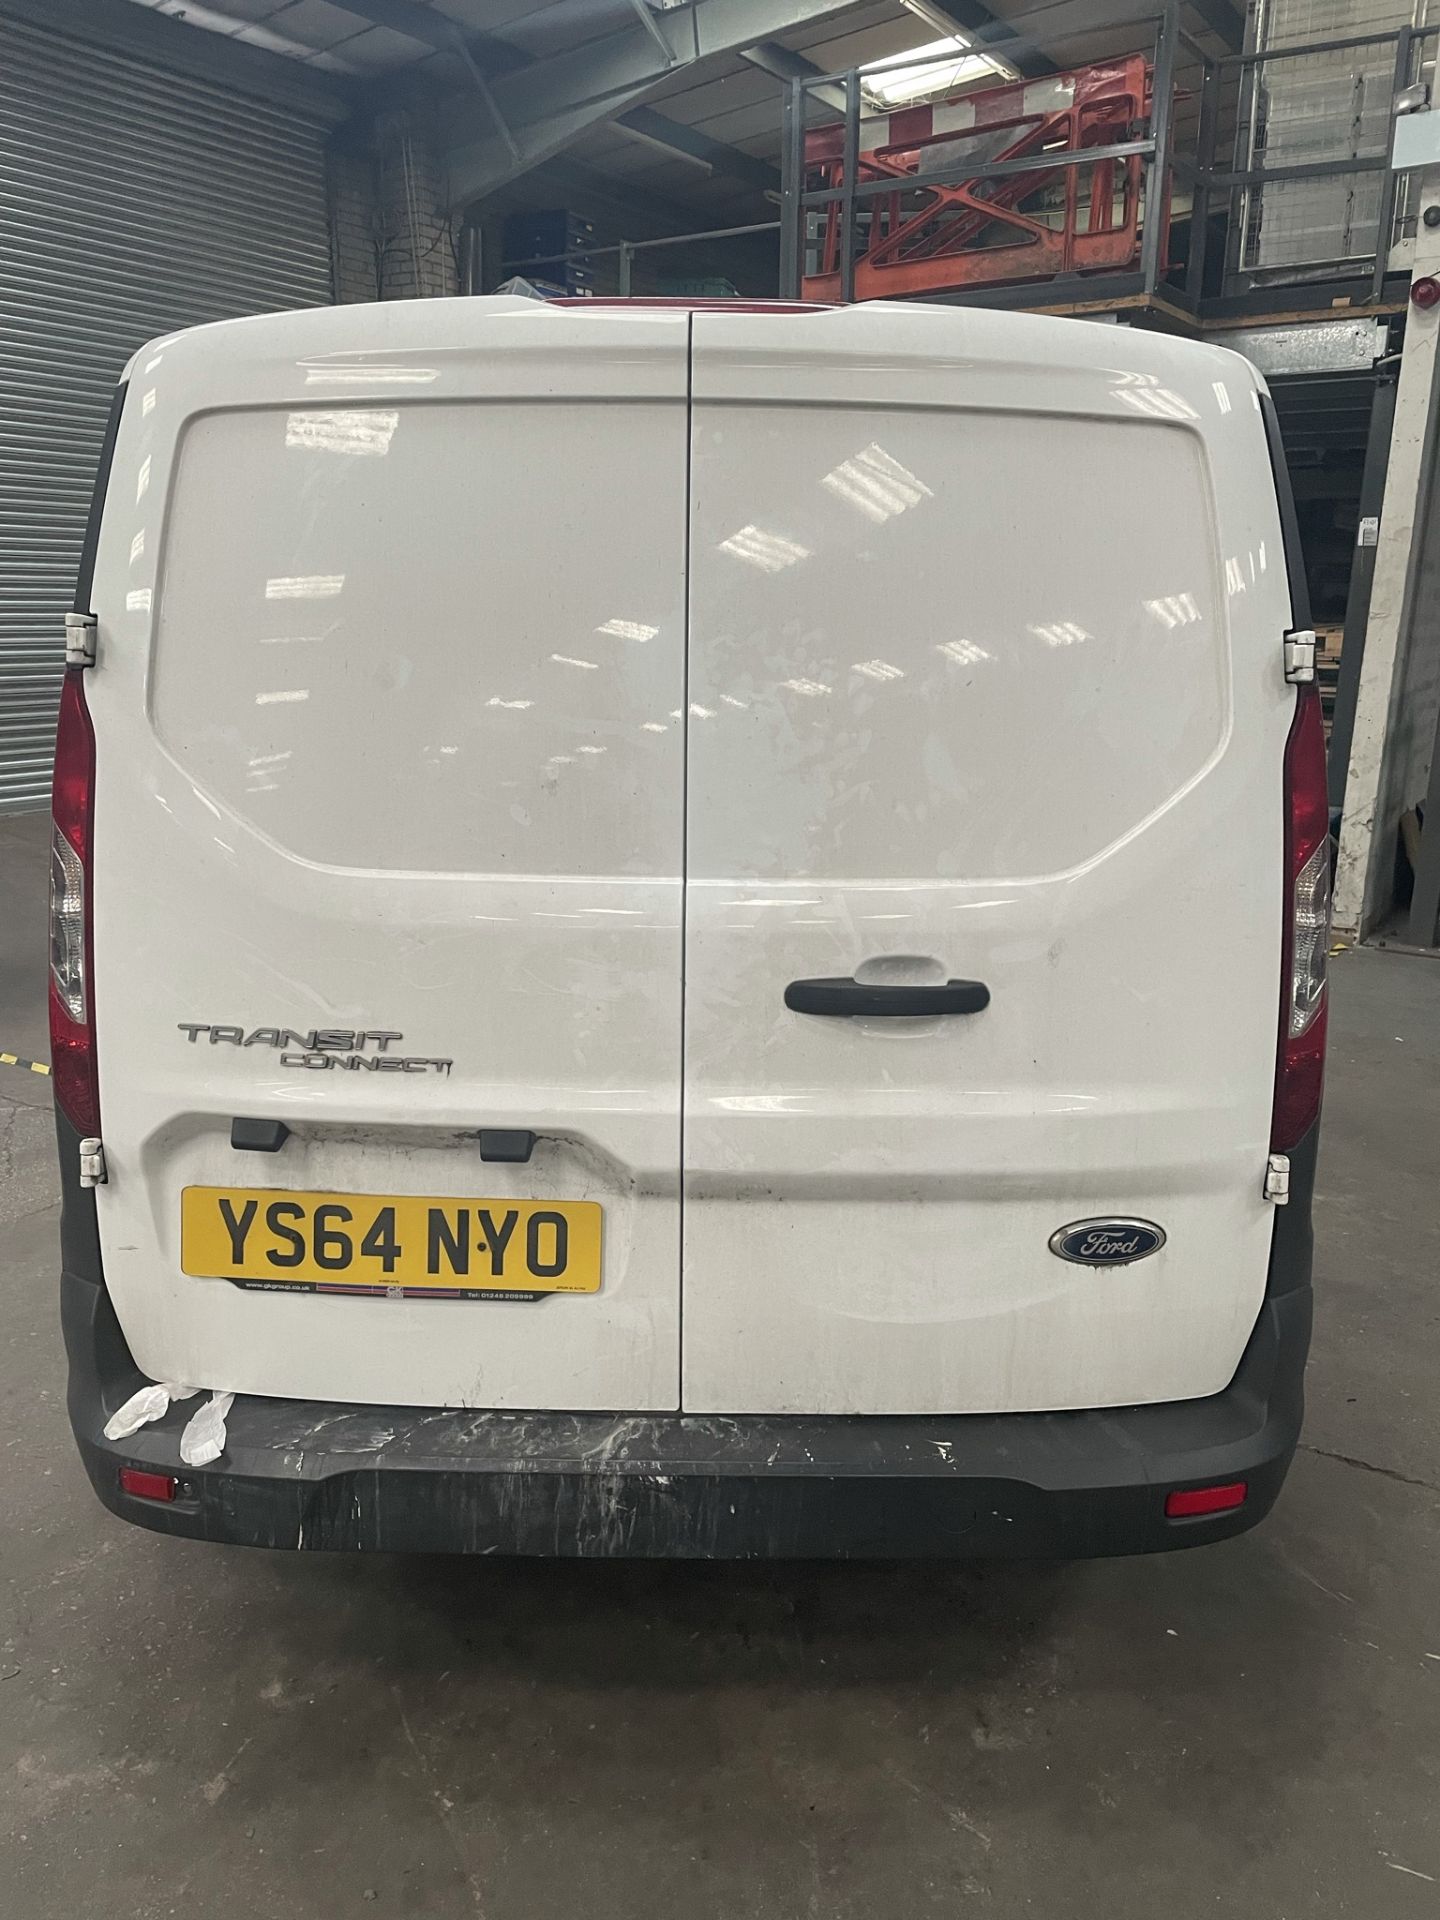 Ford Transit Connect 220 Diesel Panel Van | YS64 NYO | 135,894 Miles | PLEASE SEE DESCRIPTION - Image 5 of 14